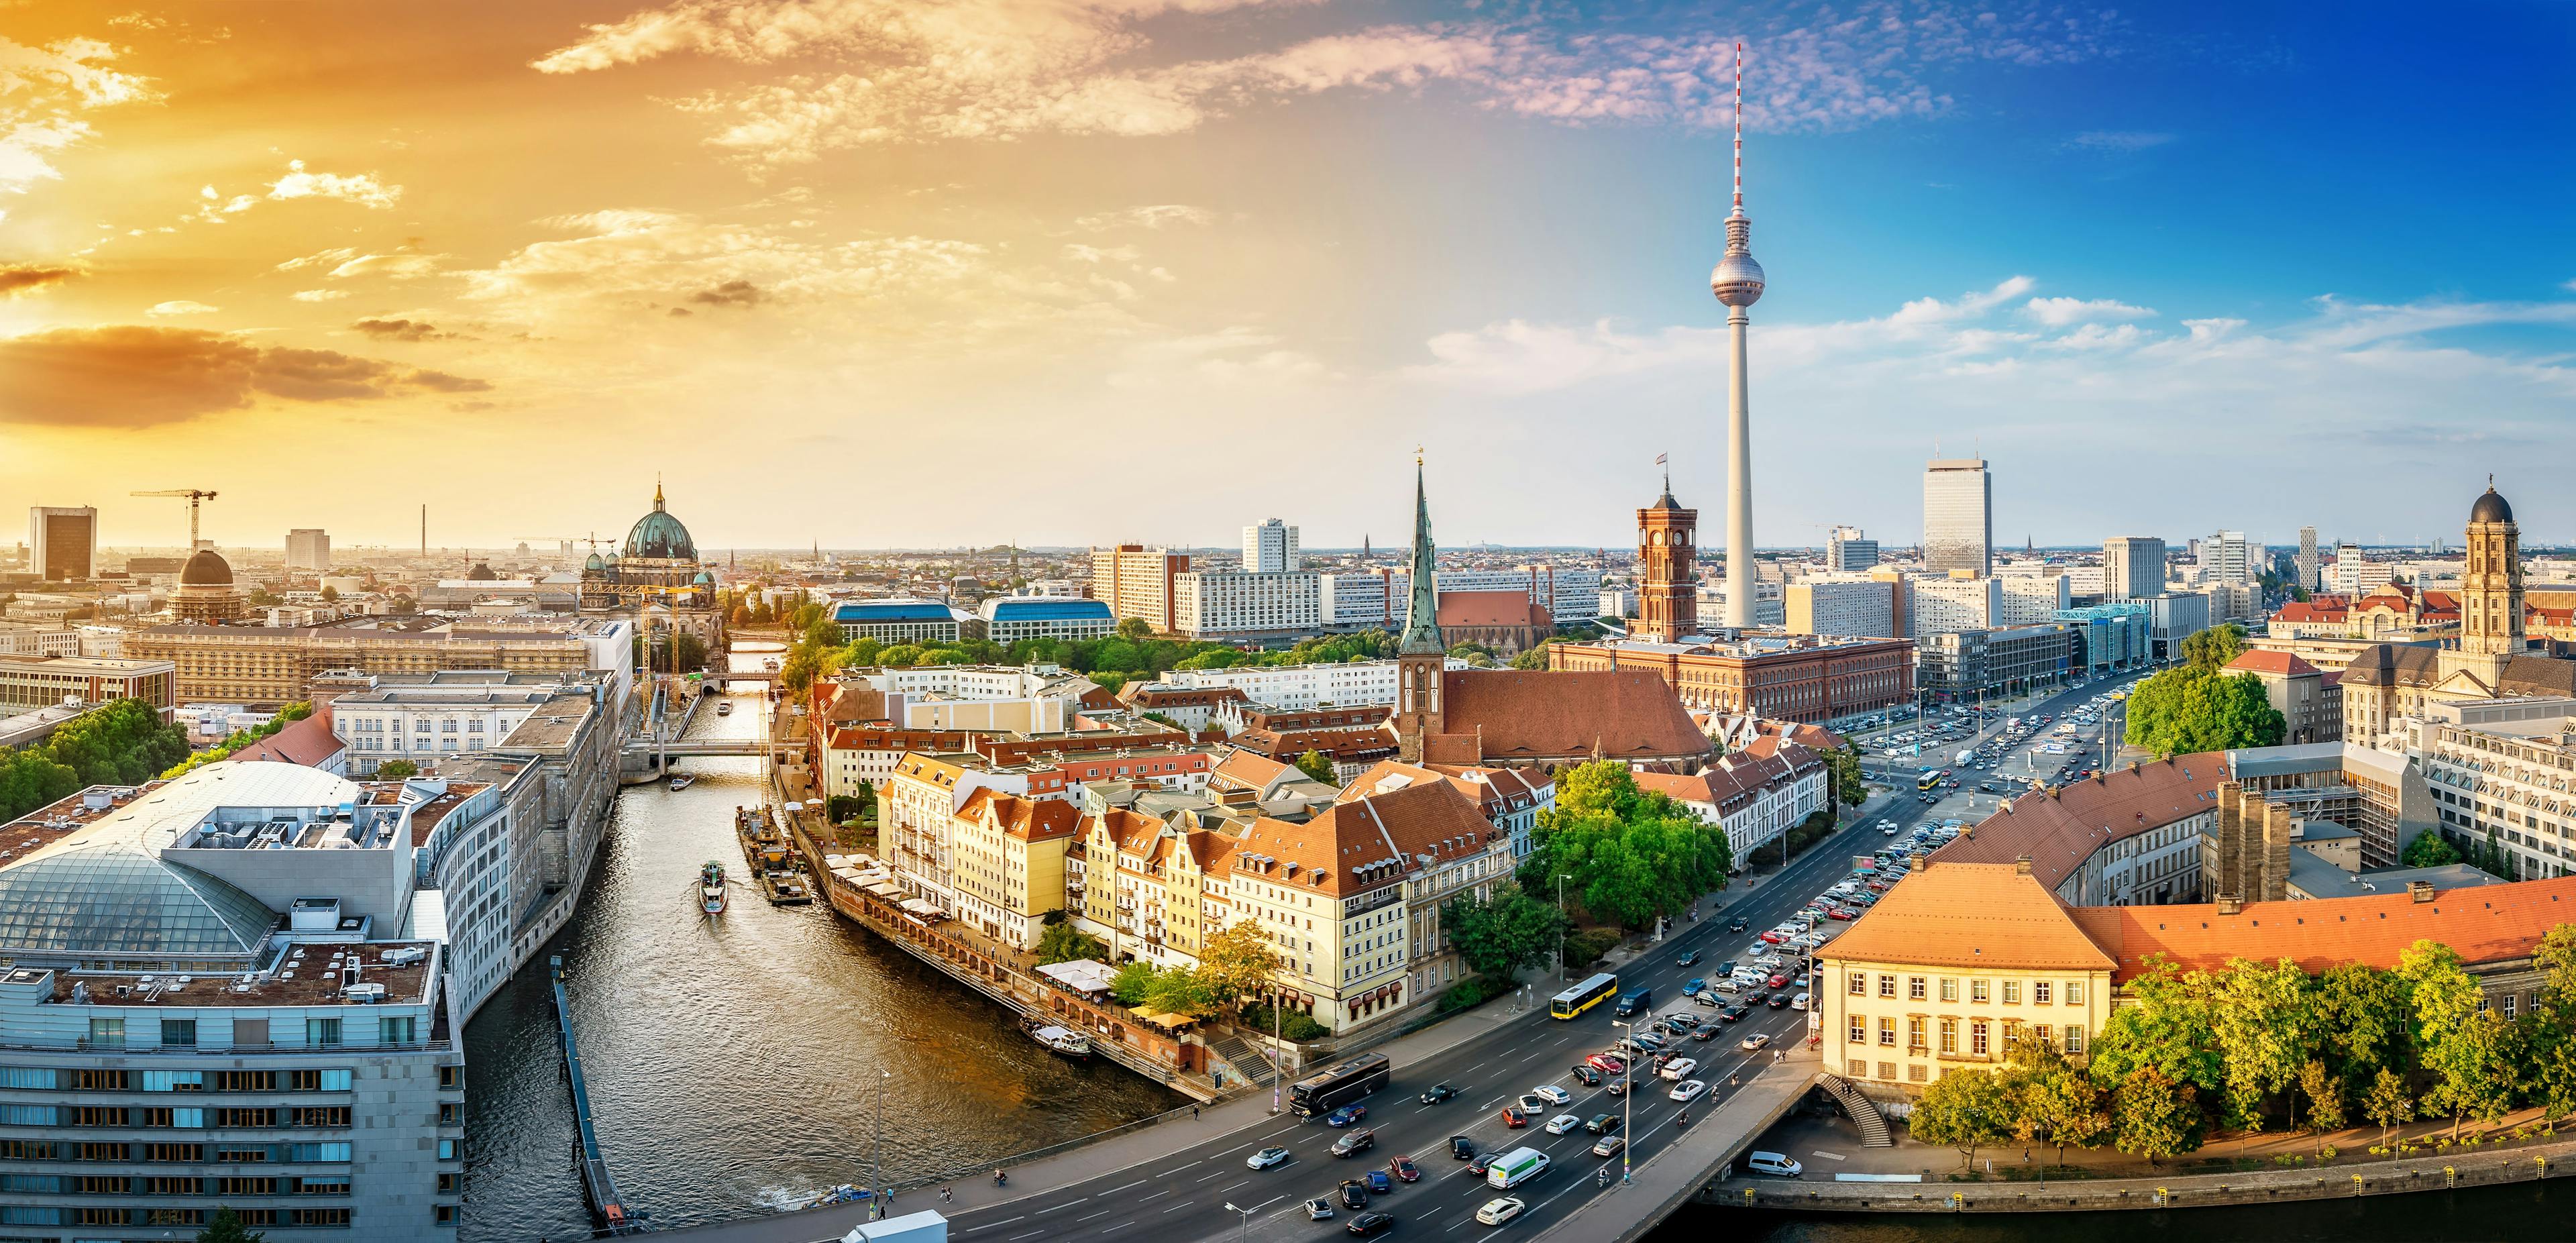 panoramic view at the berlin city center at sunset | Image Credit: © frank peters - stock.adobe.com.